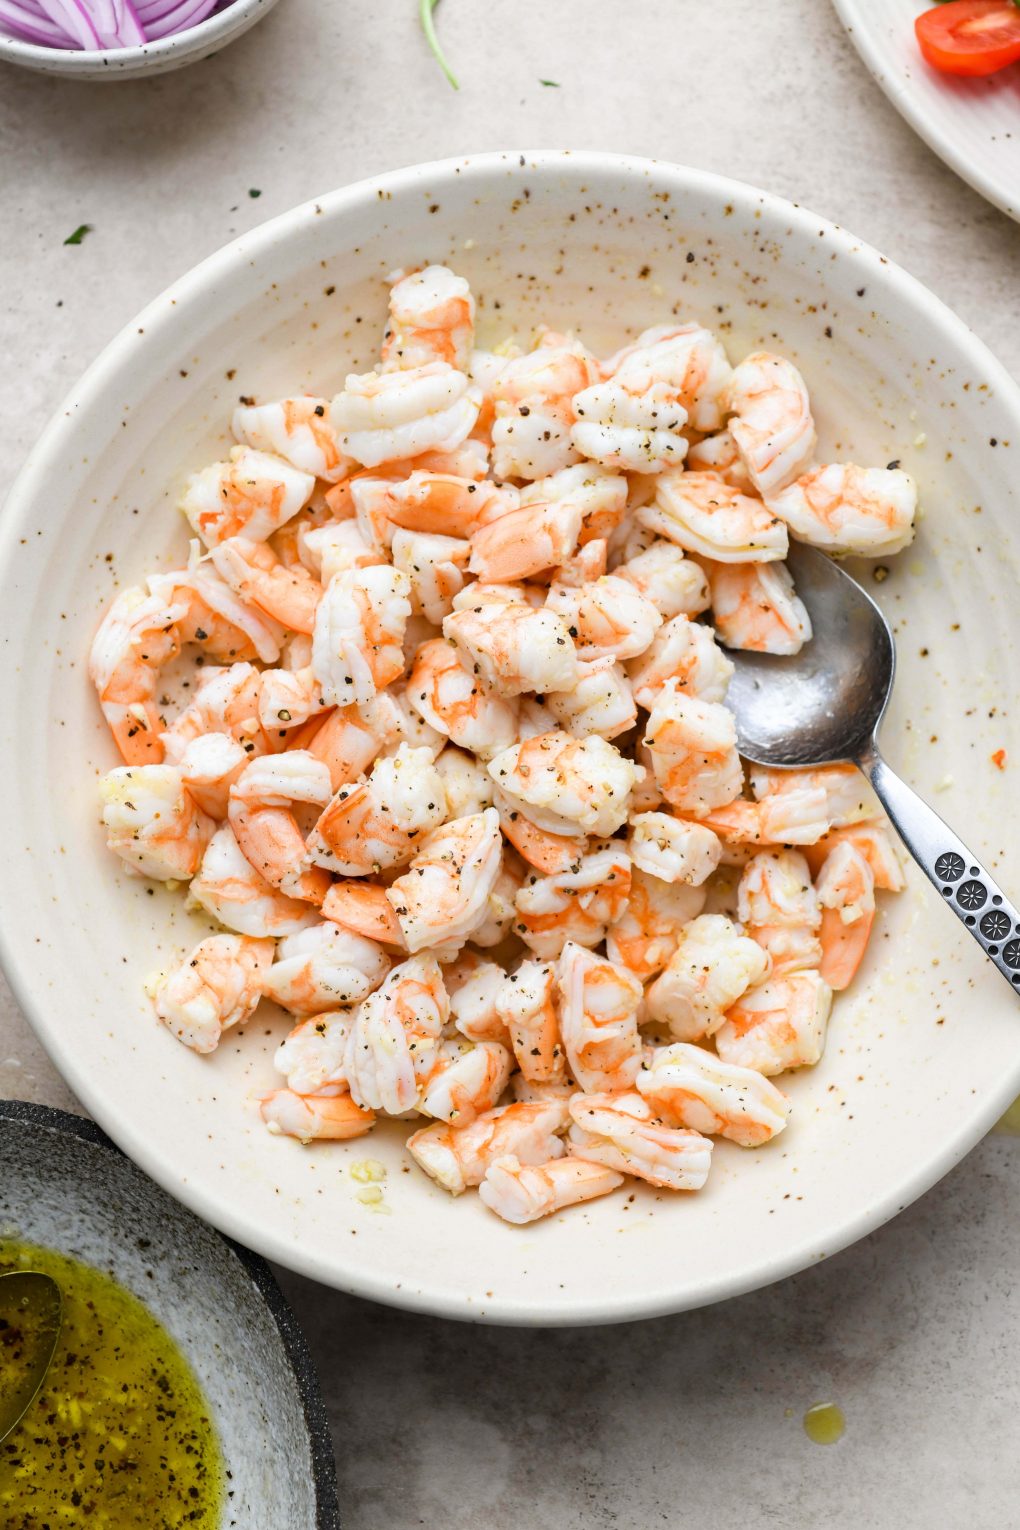 Image of a large speckled bowl of cooked shrimp without tails, cut into thirds and tossed with a bit of the lemony dressing. 